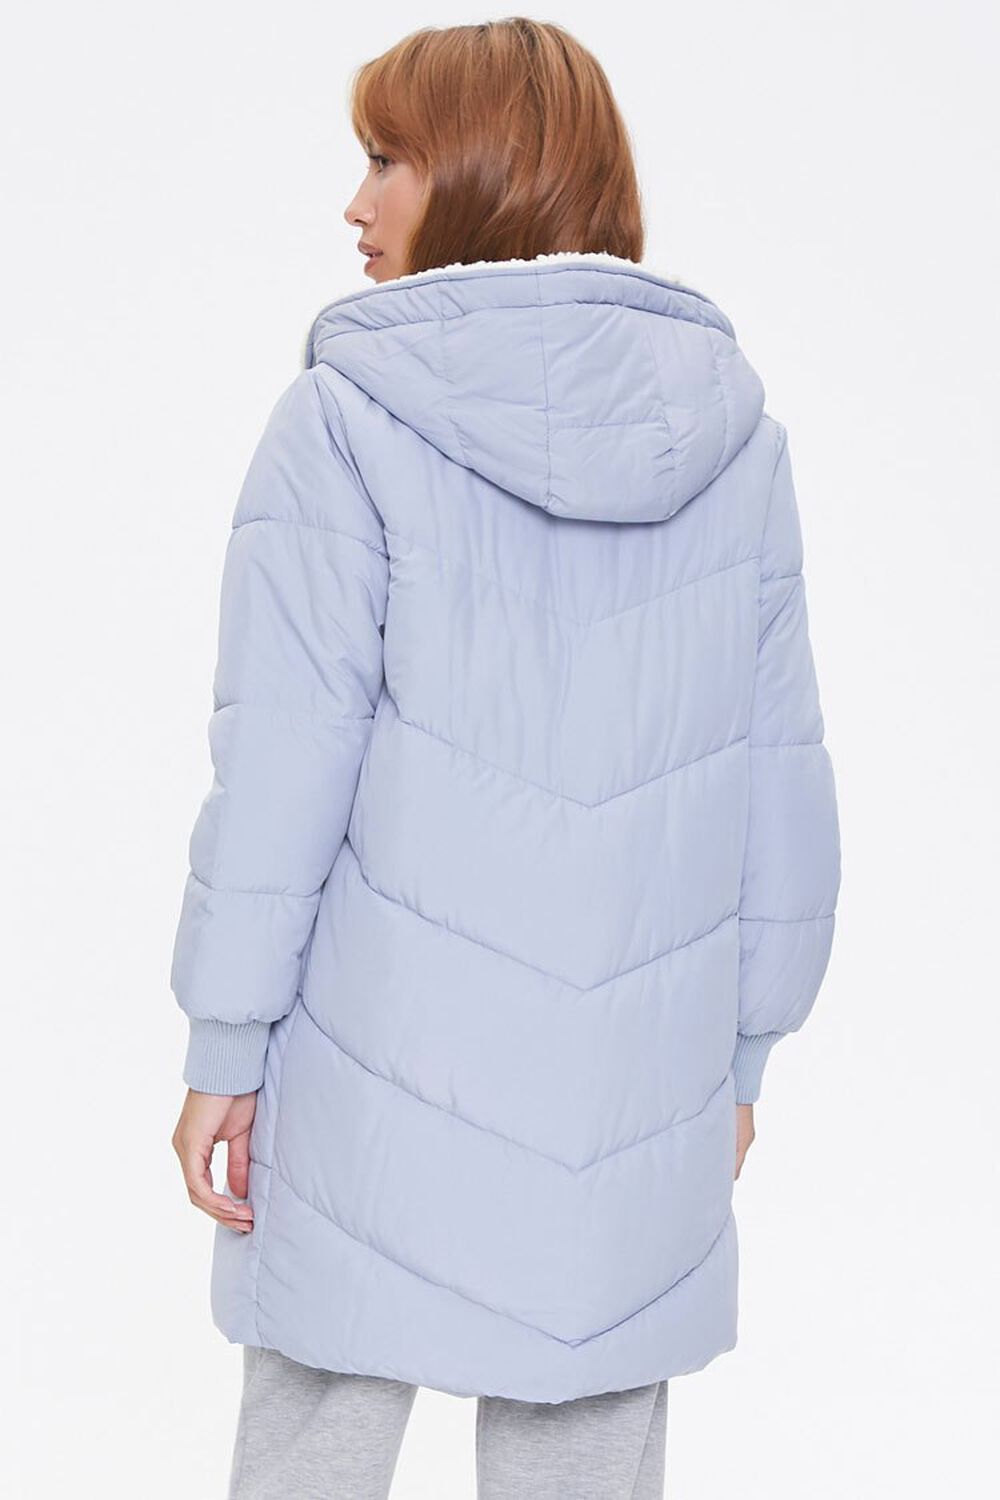 DUSTY BLUE/CREAM Faux Shearling-Lined Puffer Jacket, image 3